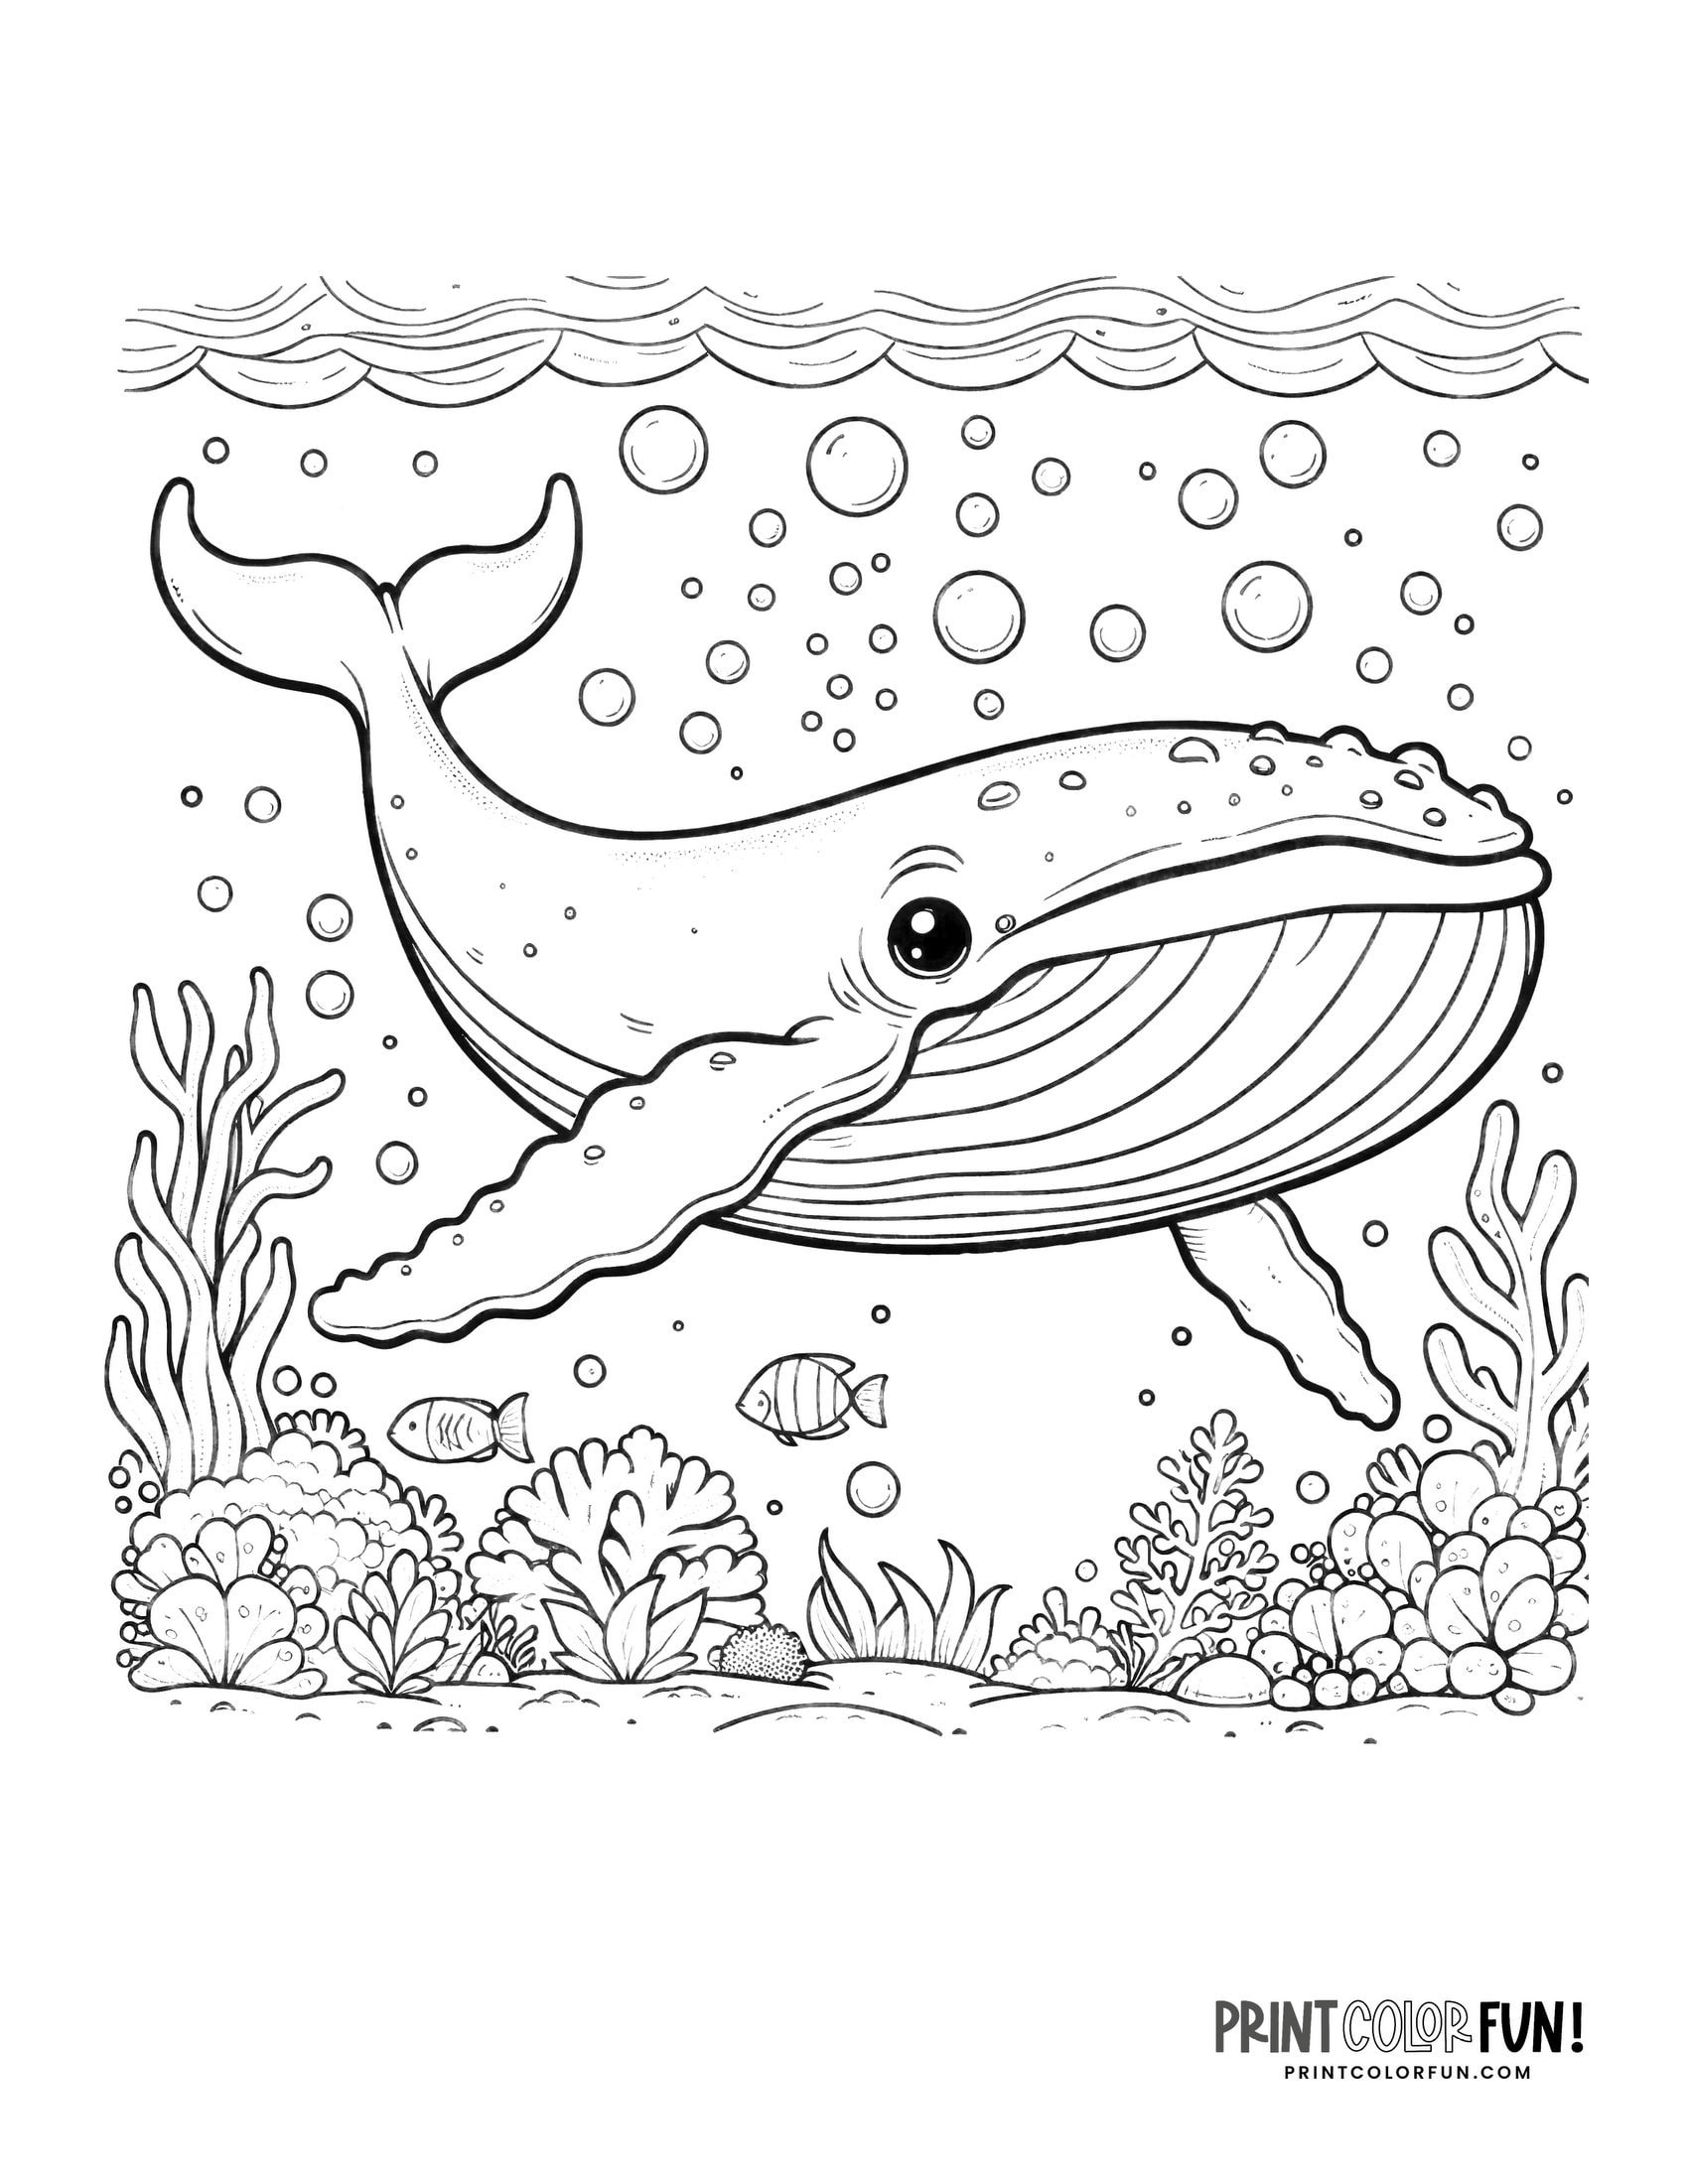 12 whale drawings & clipart: Add a ...